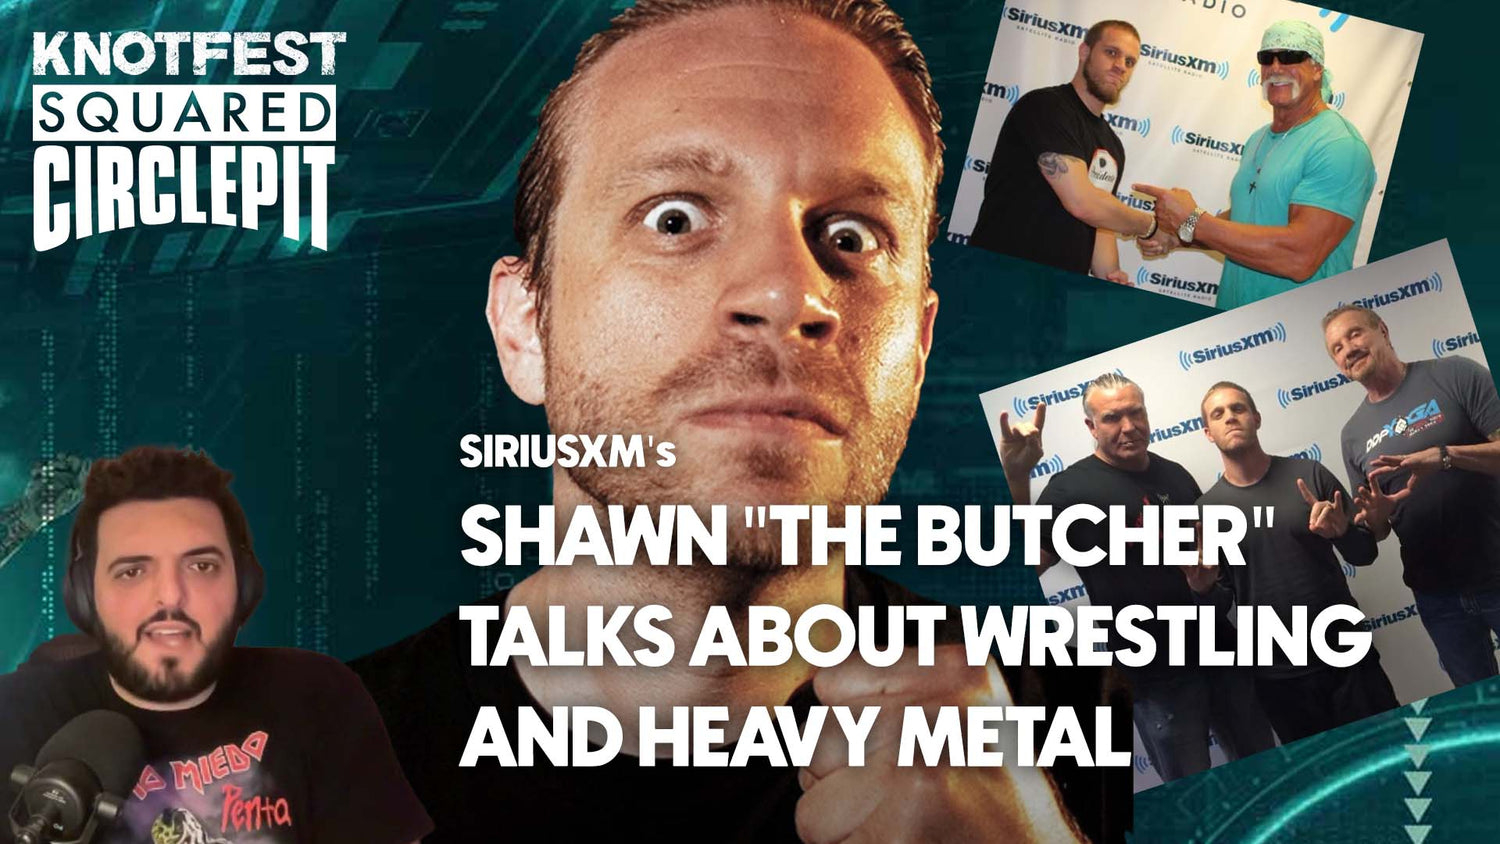 SIRIUSXM’S SHAWN “THE BUTCHER” ON GETTING INTO METAL VIA WWE – SQUARED CIRCLE PIT